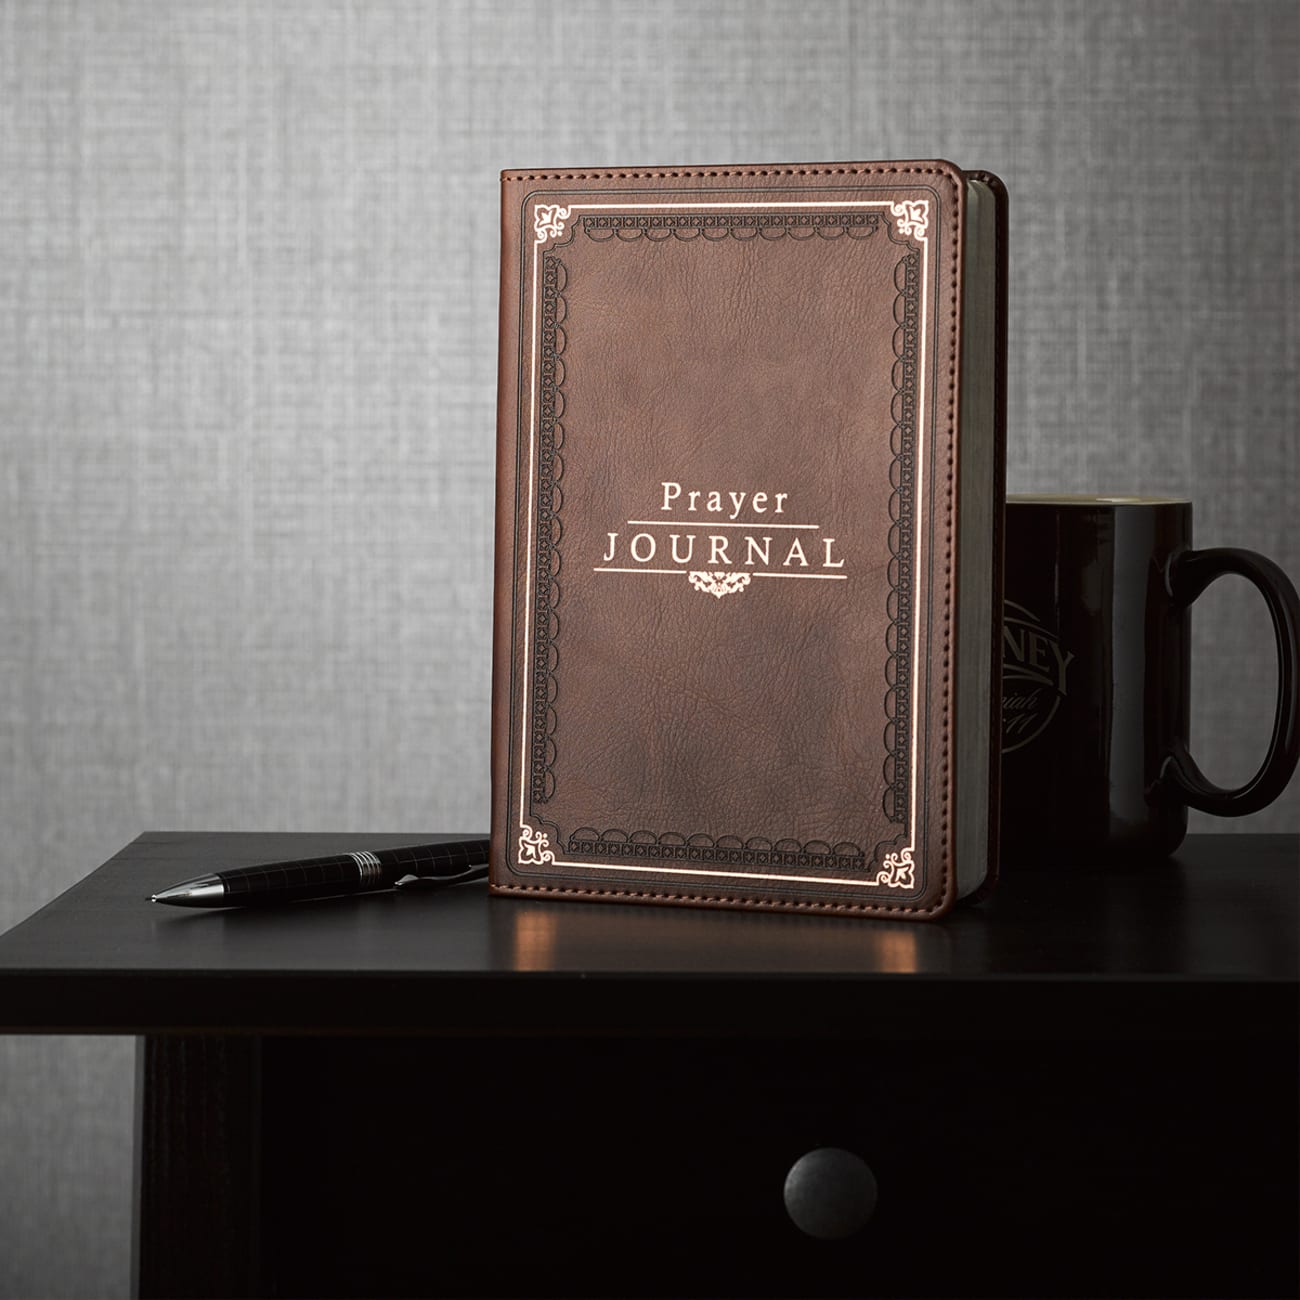 Prayer Journal With Scriptures Brown Luxleather Imitation Leather